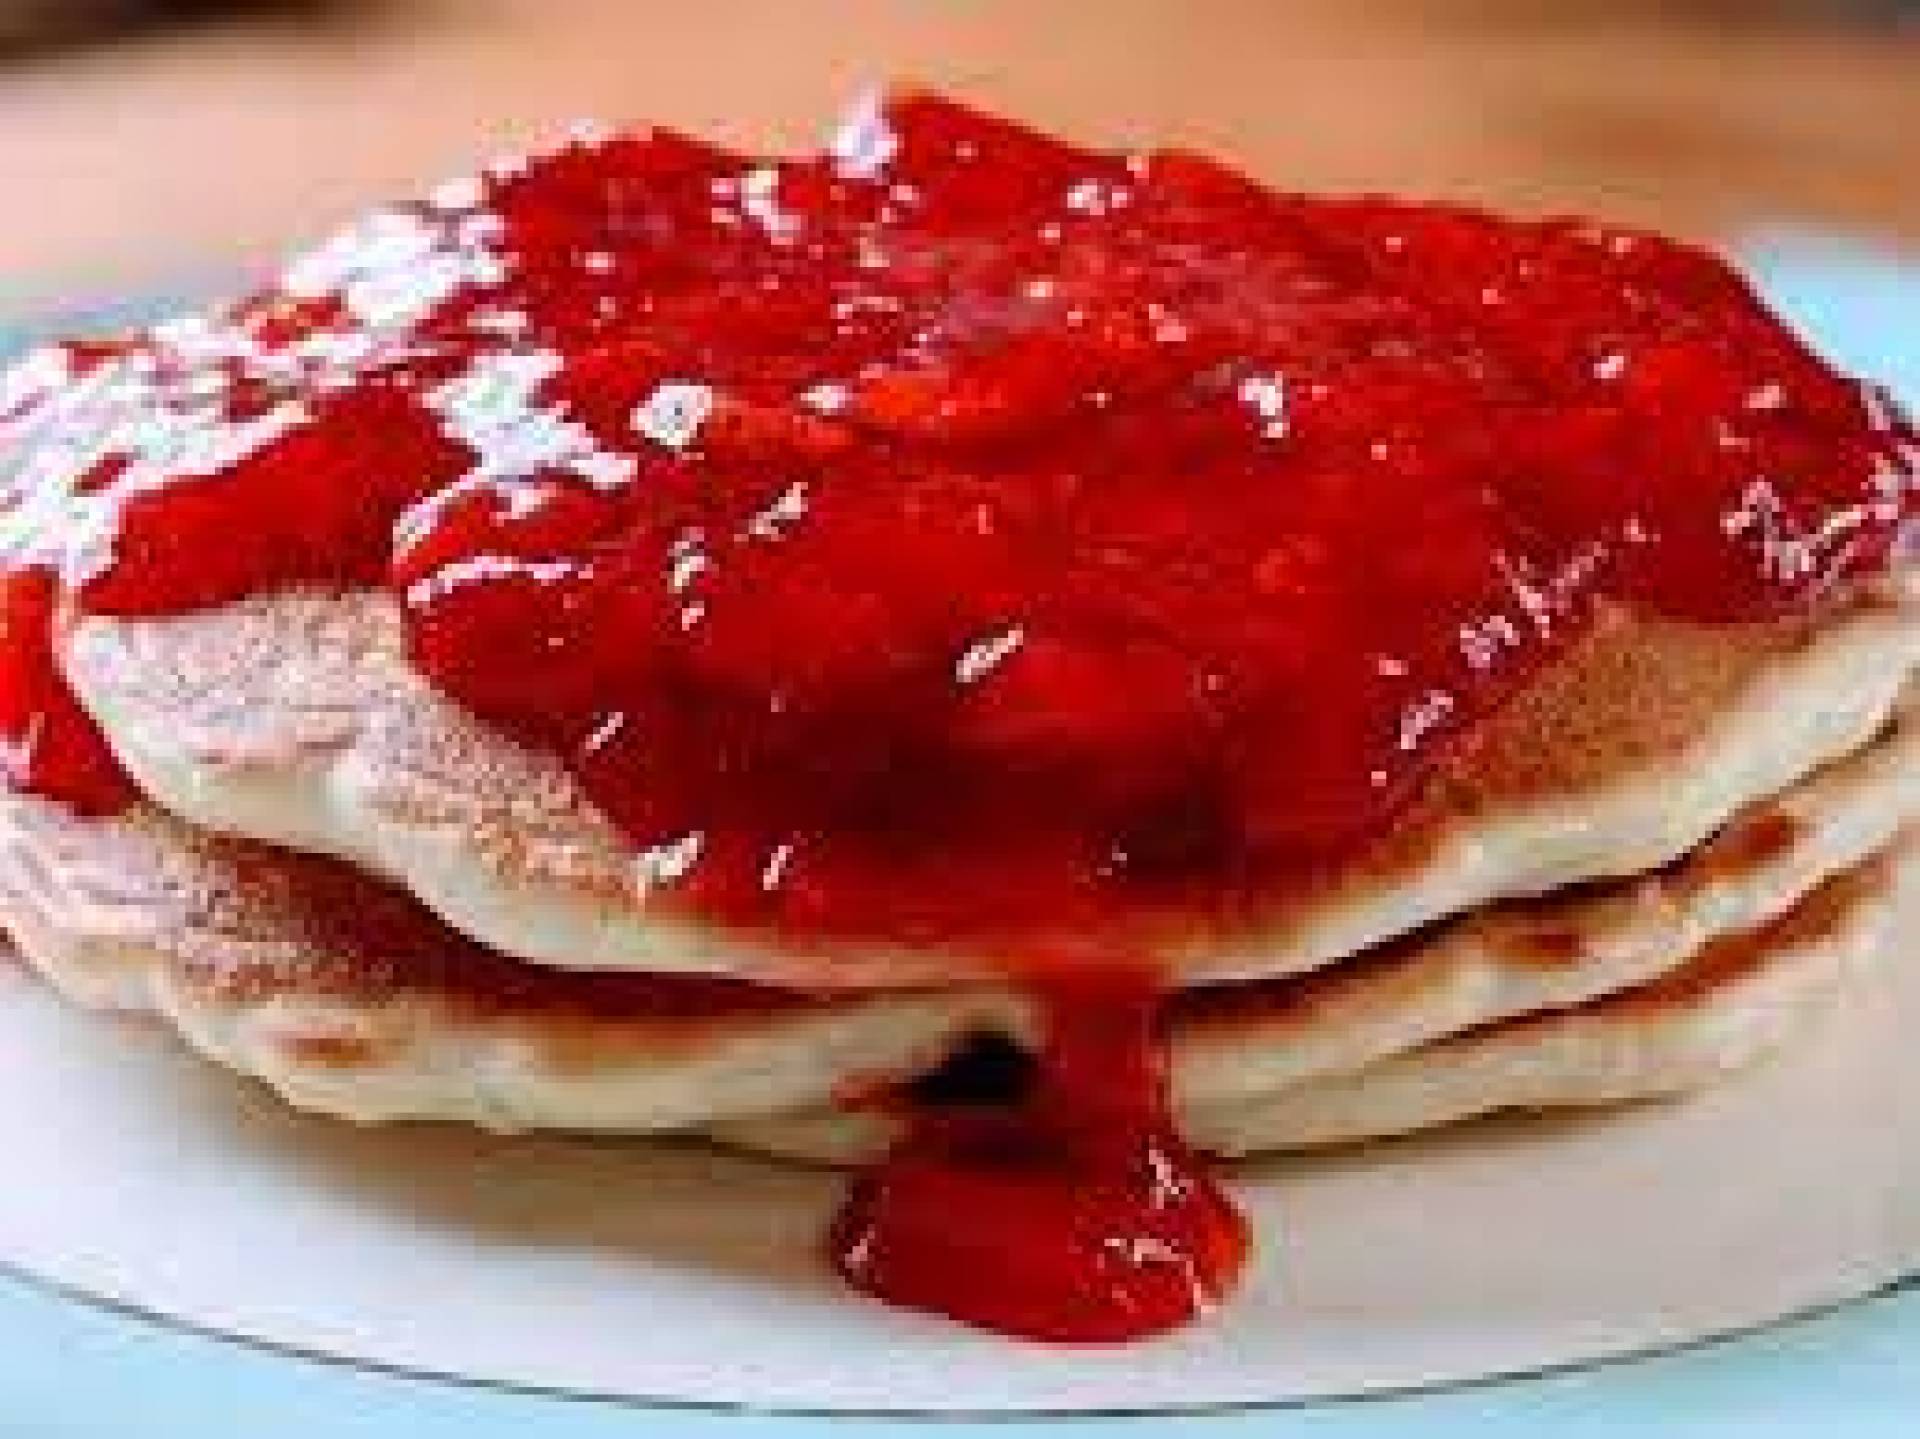 Chocolate Chip Protein Pancakes w/ Strawberry Compote